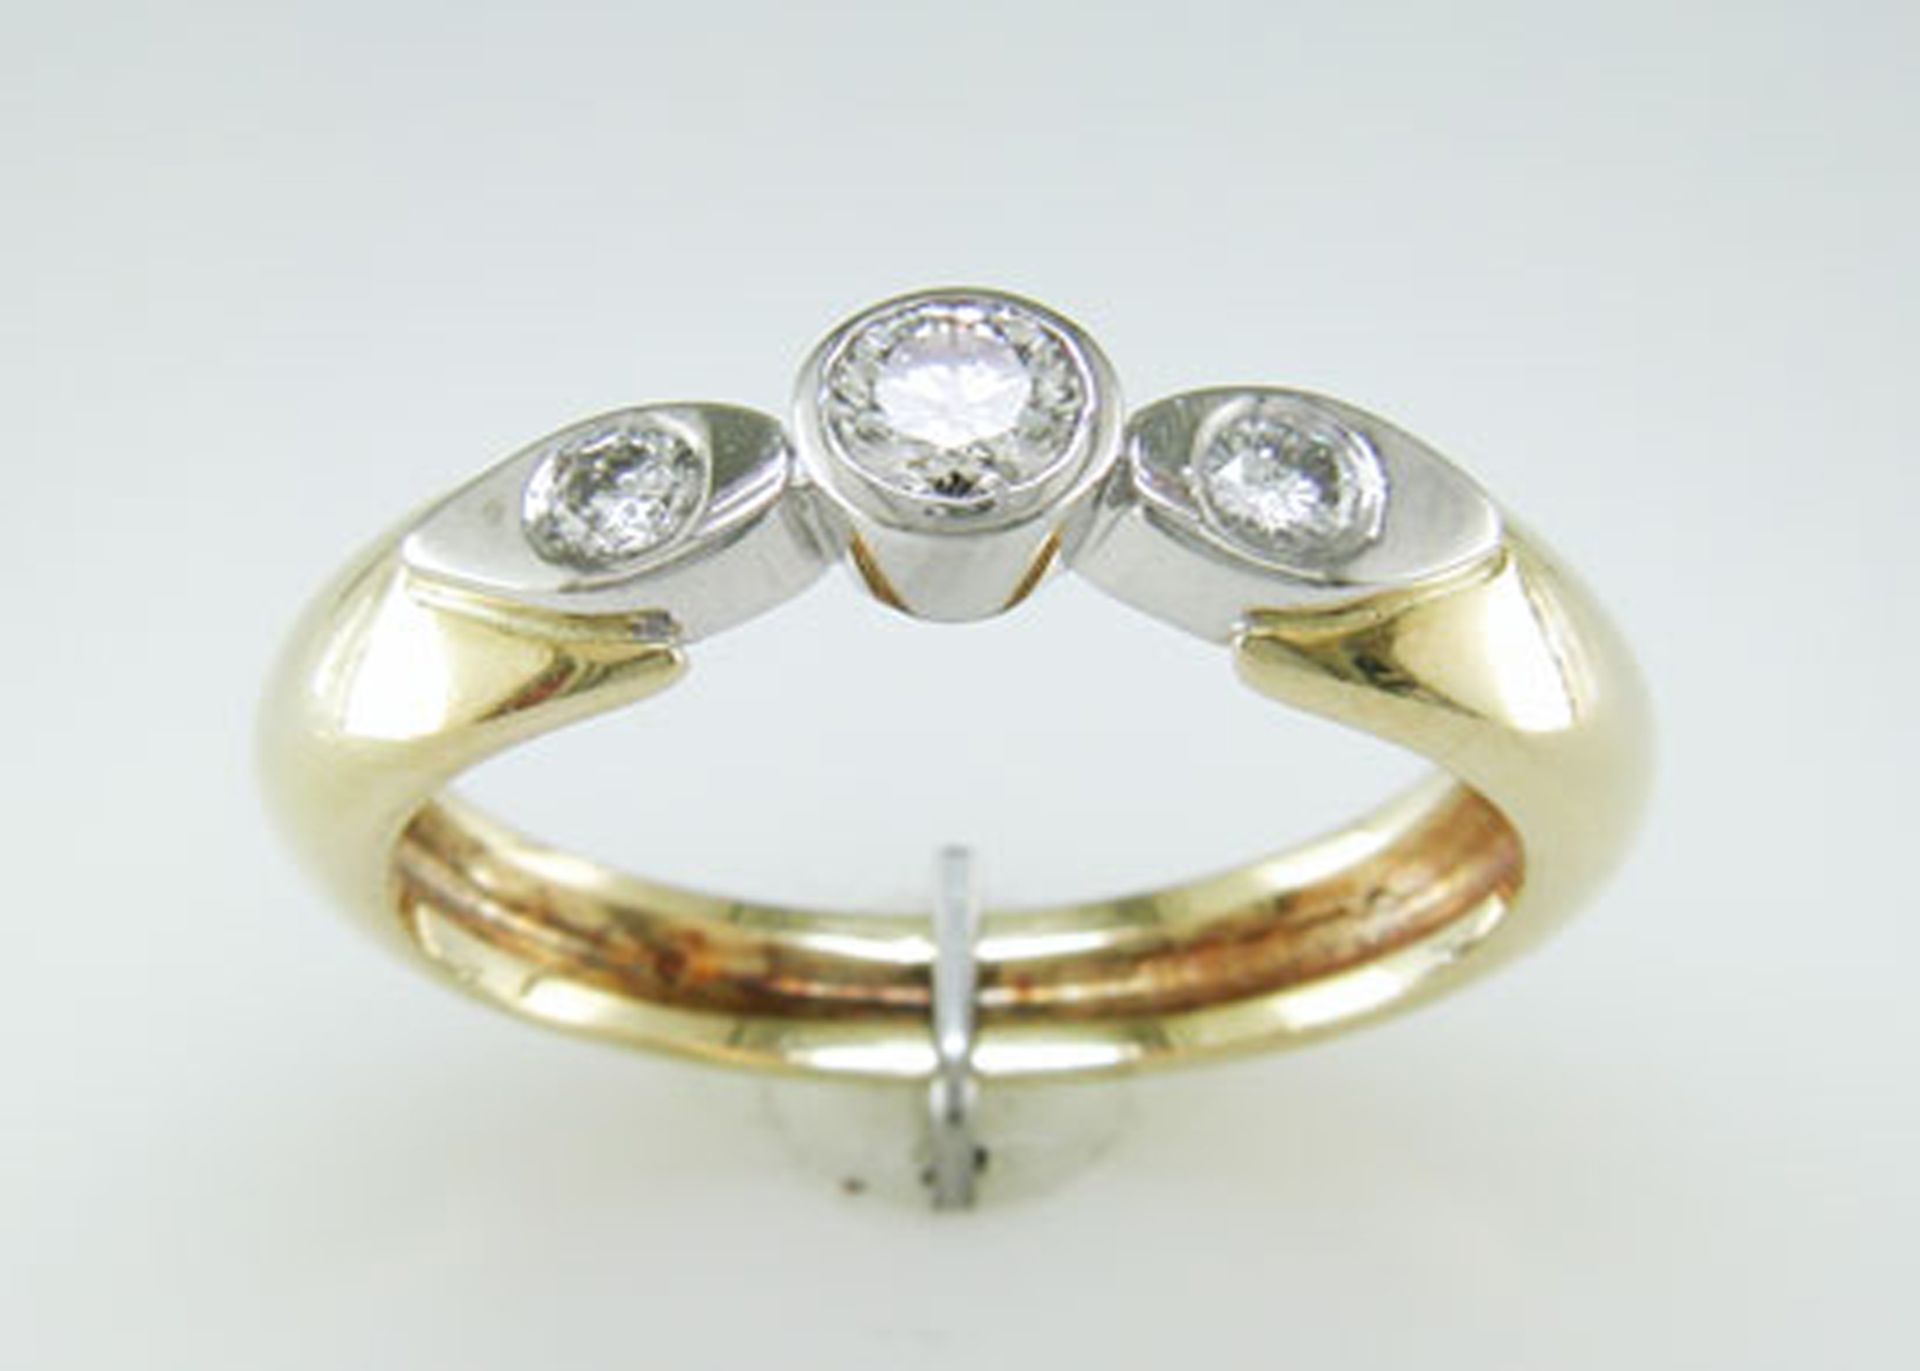 18ct Three Stone Rub Over Stone Set Shoulder Diamond Ring 0.41 Carats - Valued by GIE £10,995.00 - A - Image 7 of 8